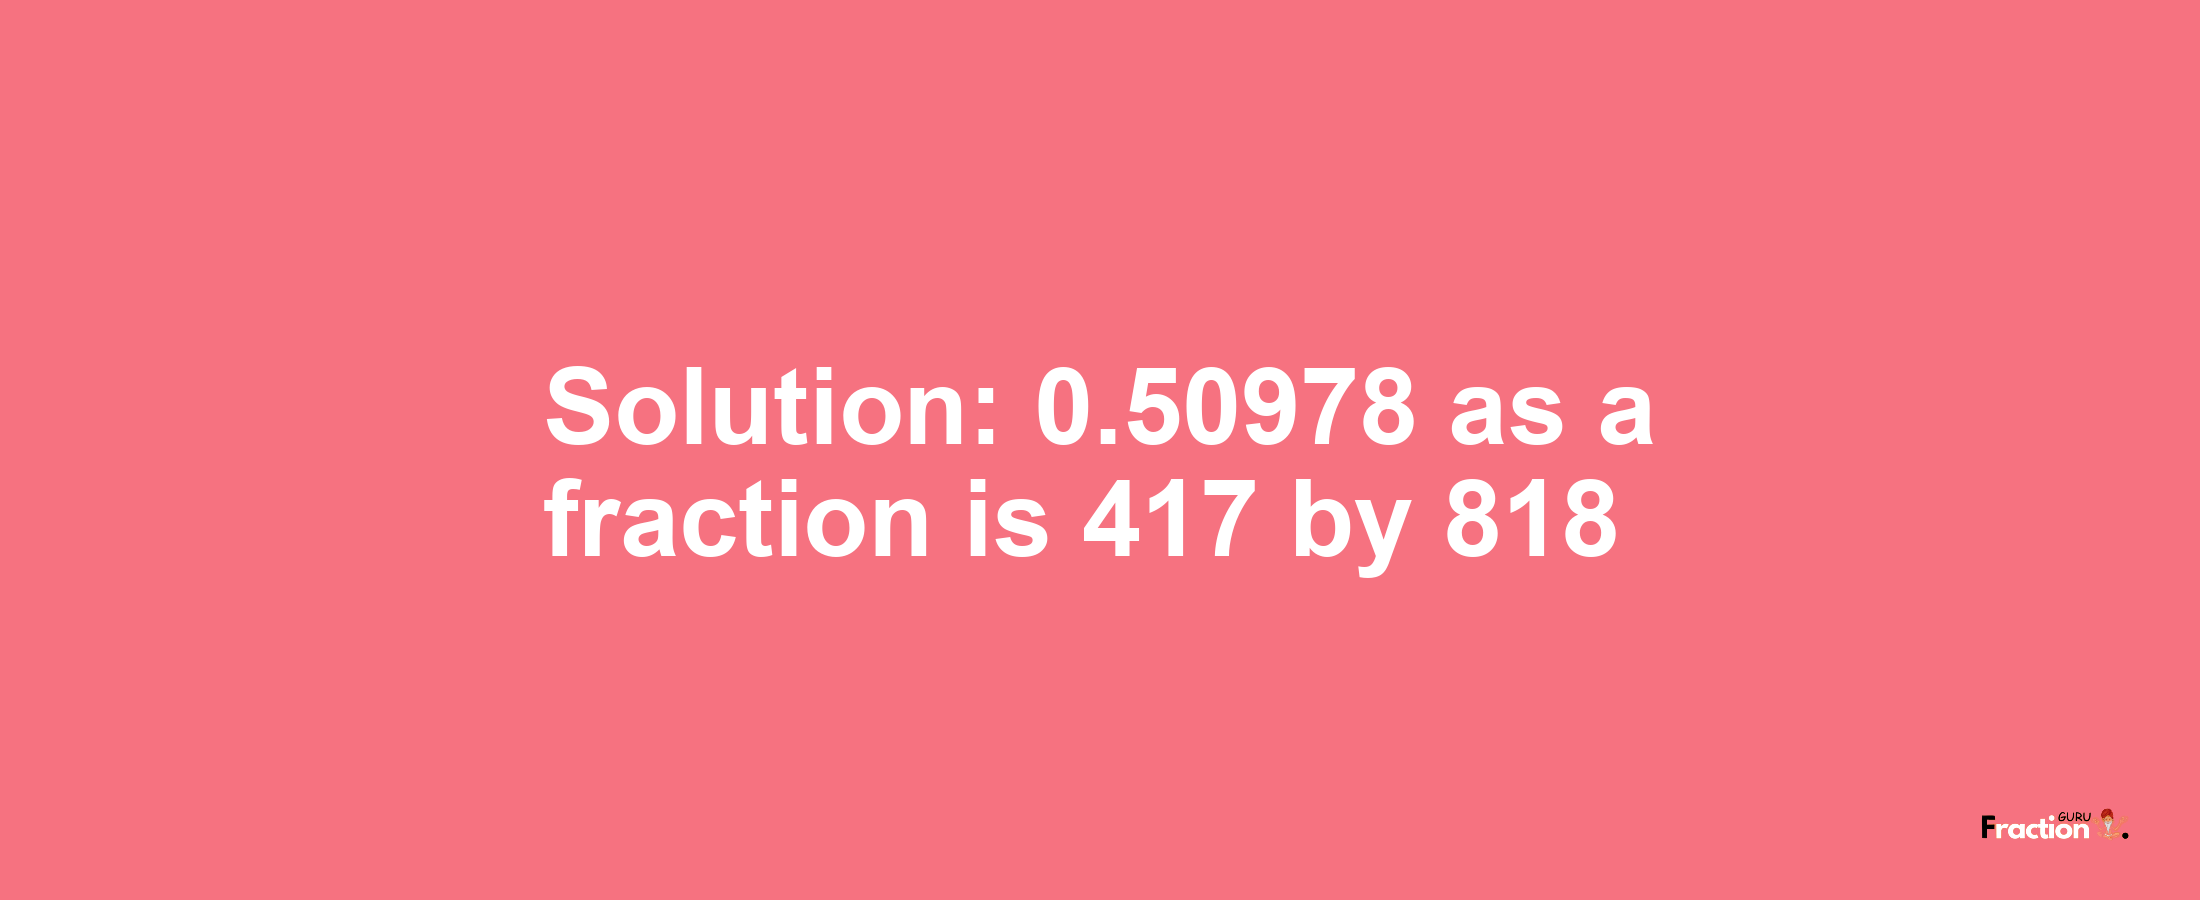 Solution:0.50978 as a fraction is 417/818